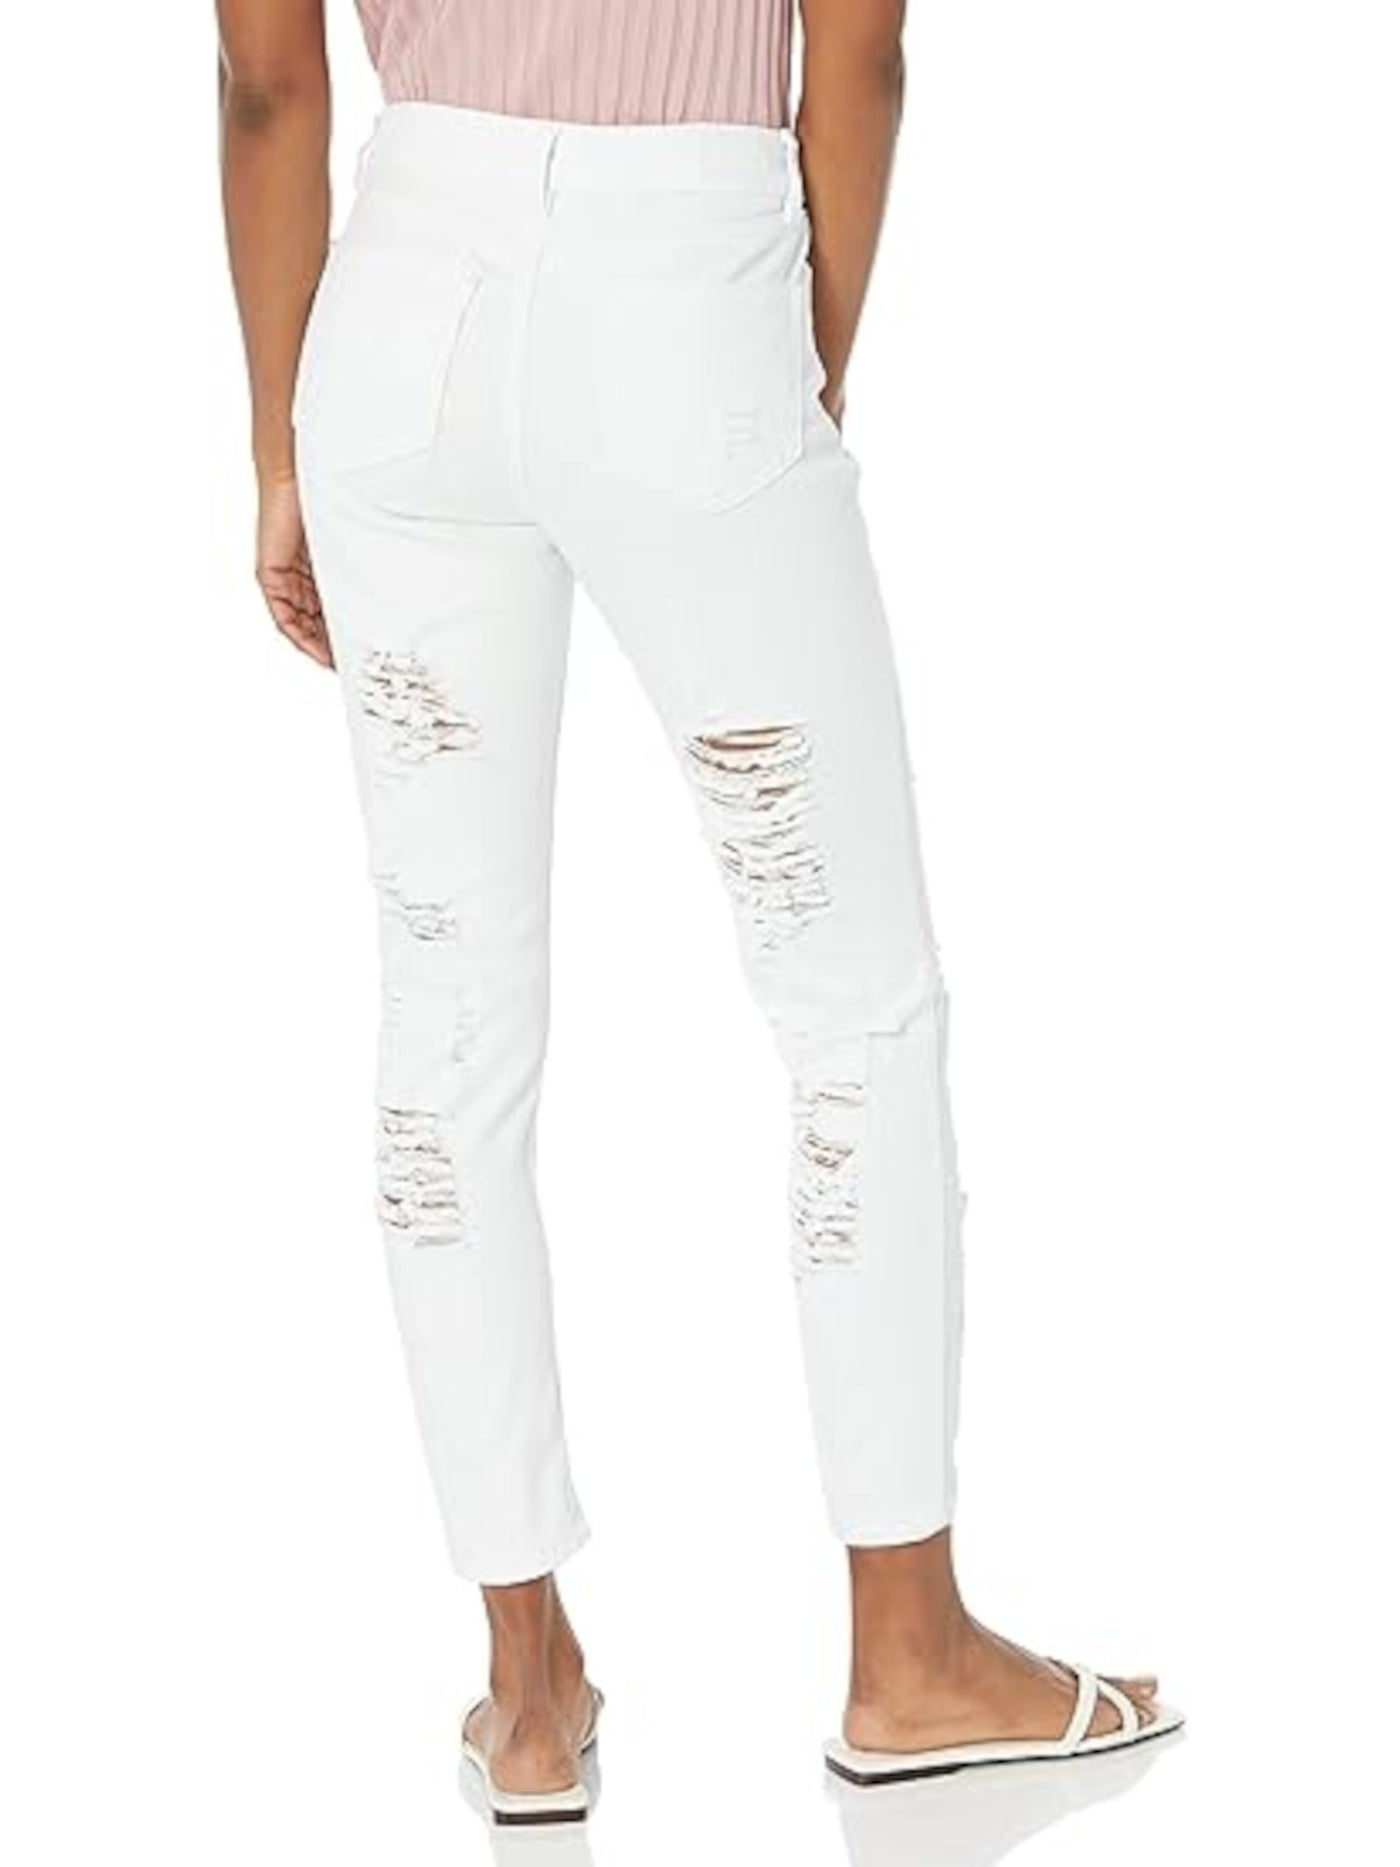 DOLLHOUSE Womens White Zippered Distressed Button Closure Hi-rise Skinny Jeans Juniors 3\4